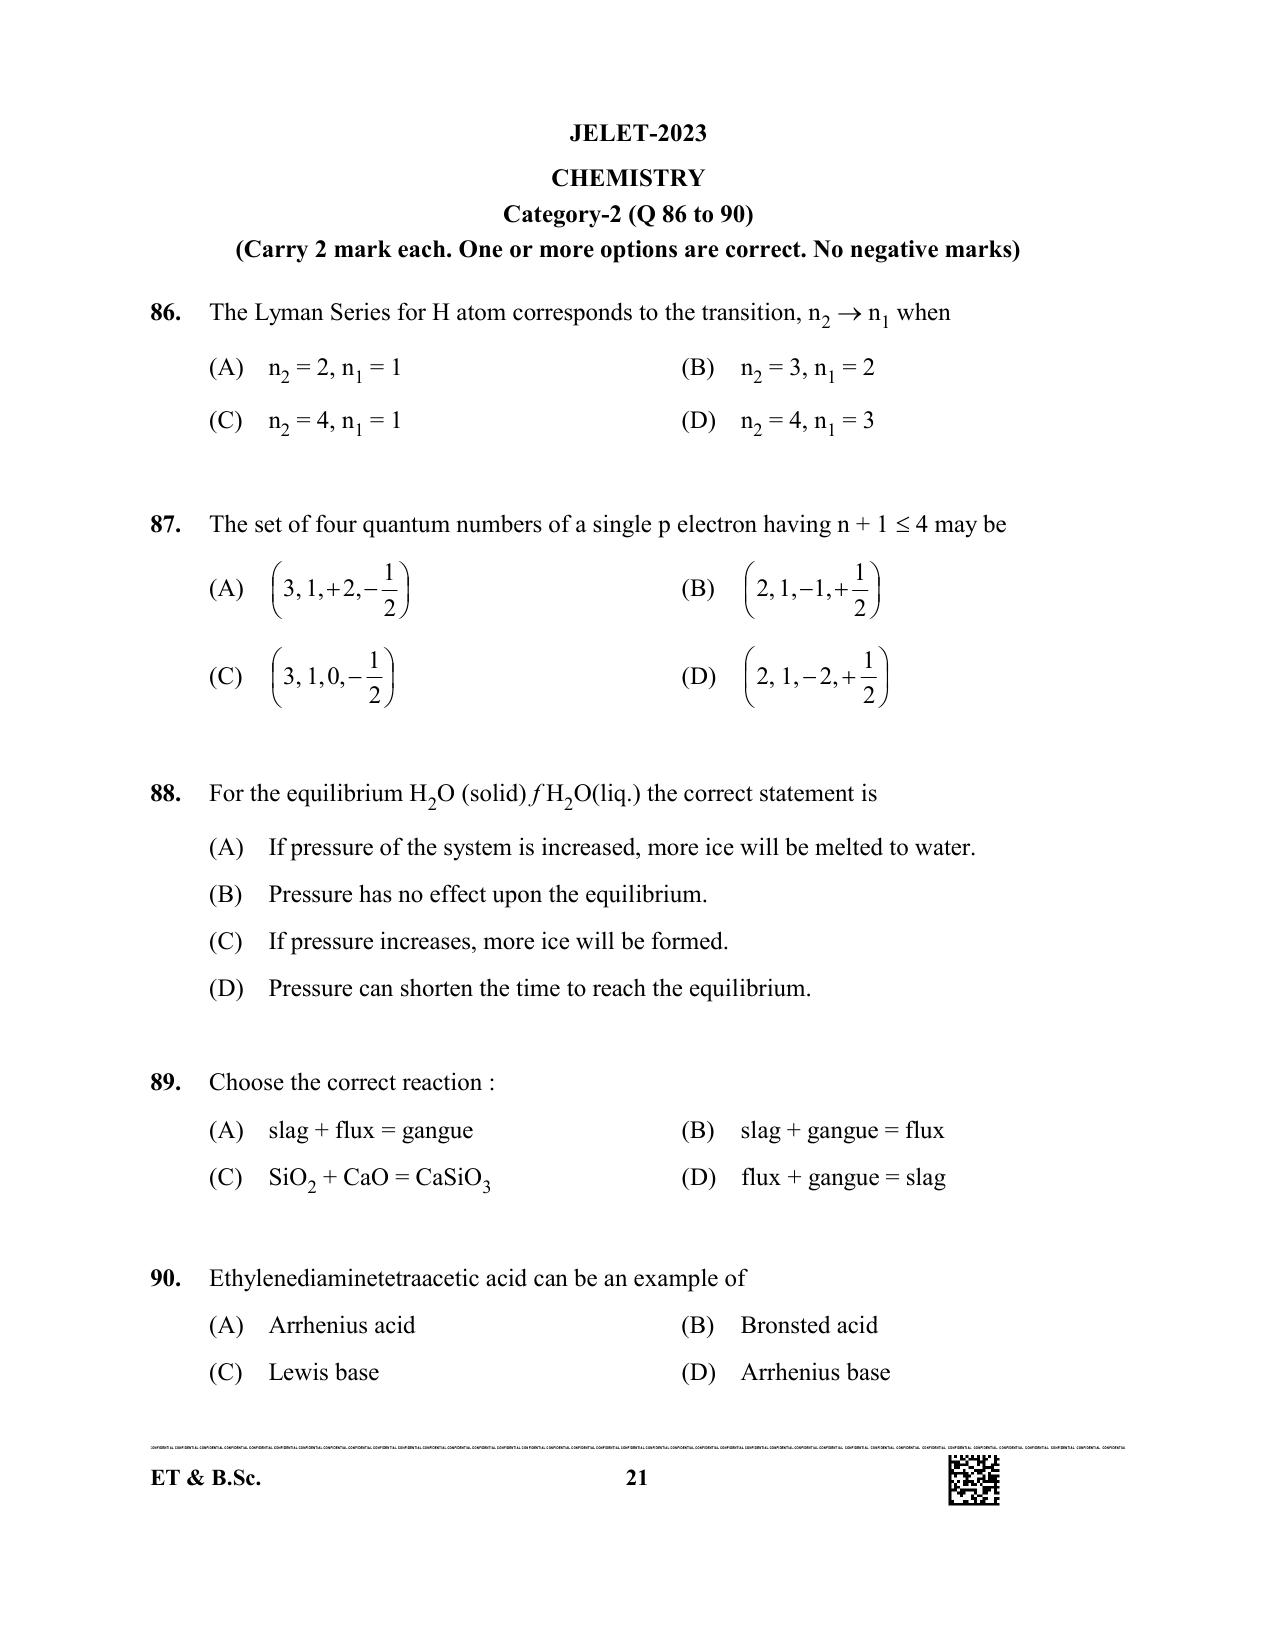 WBJEE JELET 2023 Paper I (ET & BSC) Question Papers - Page 21